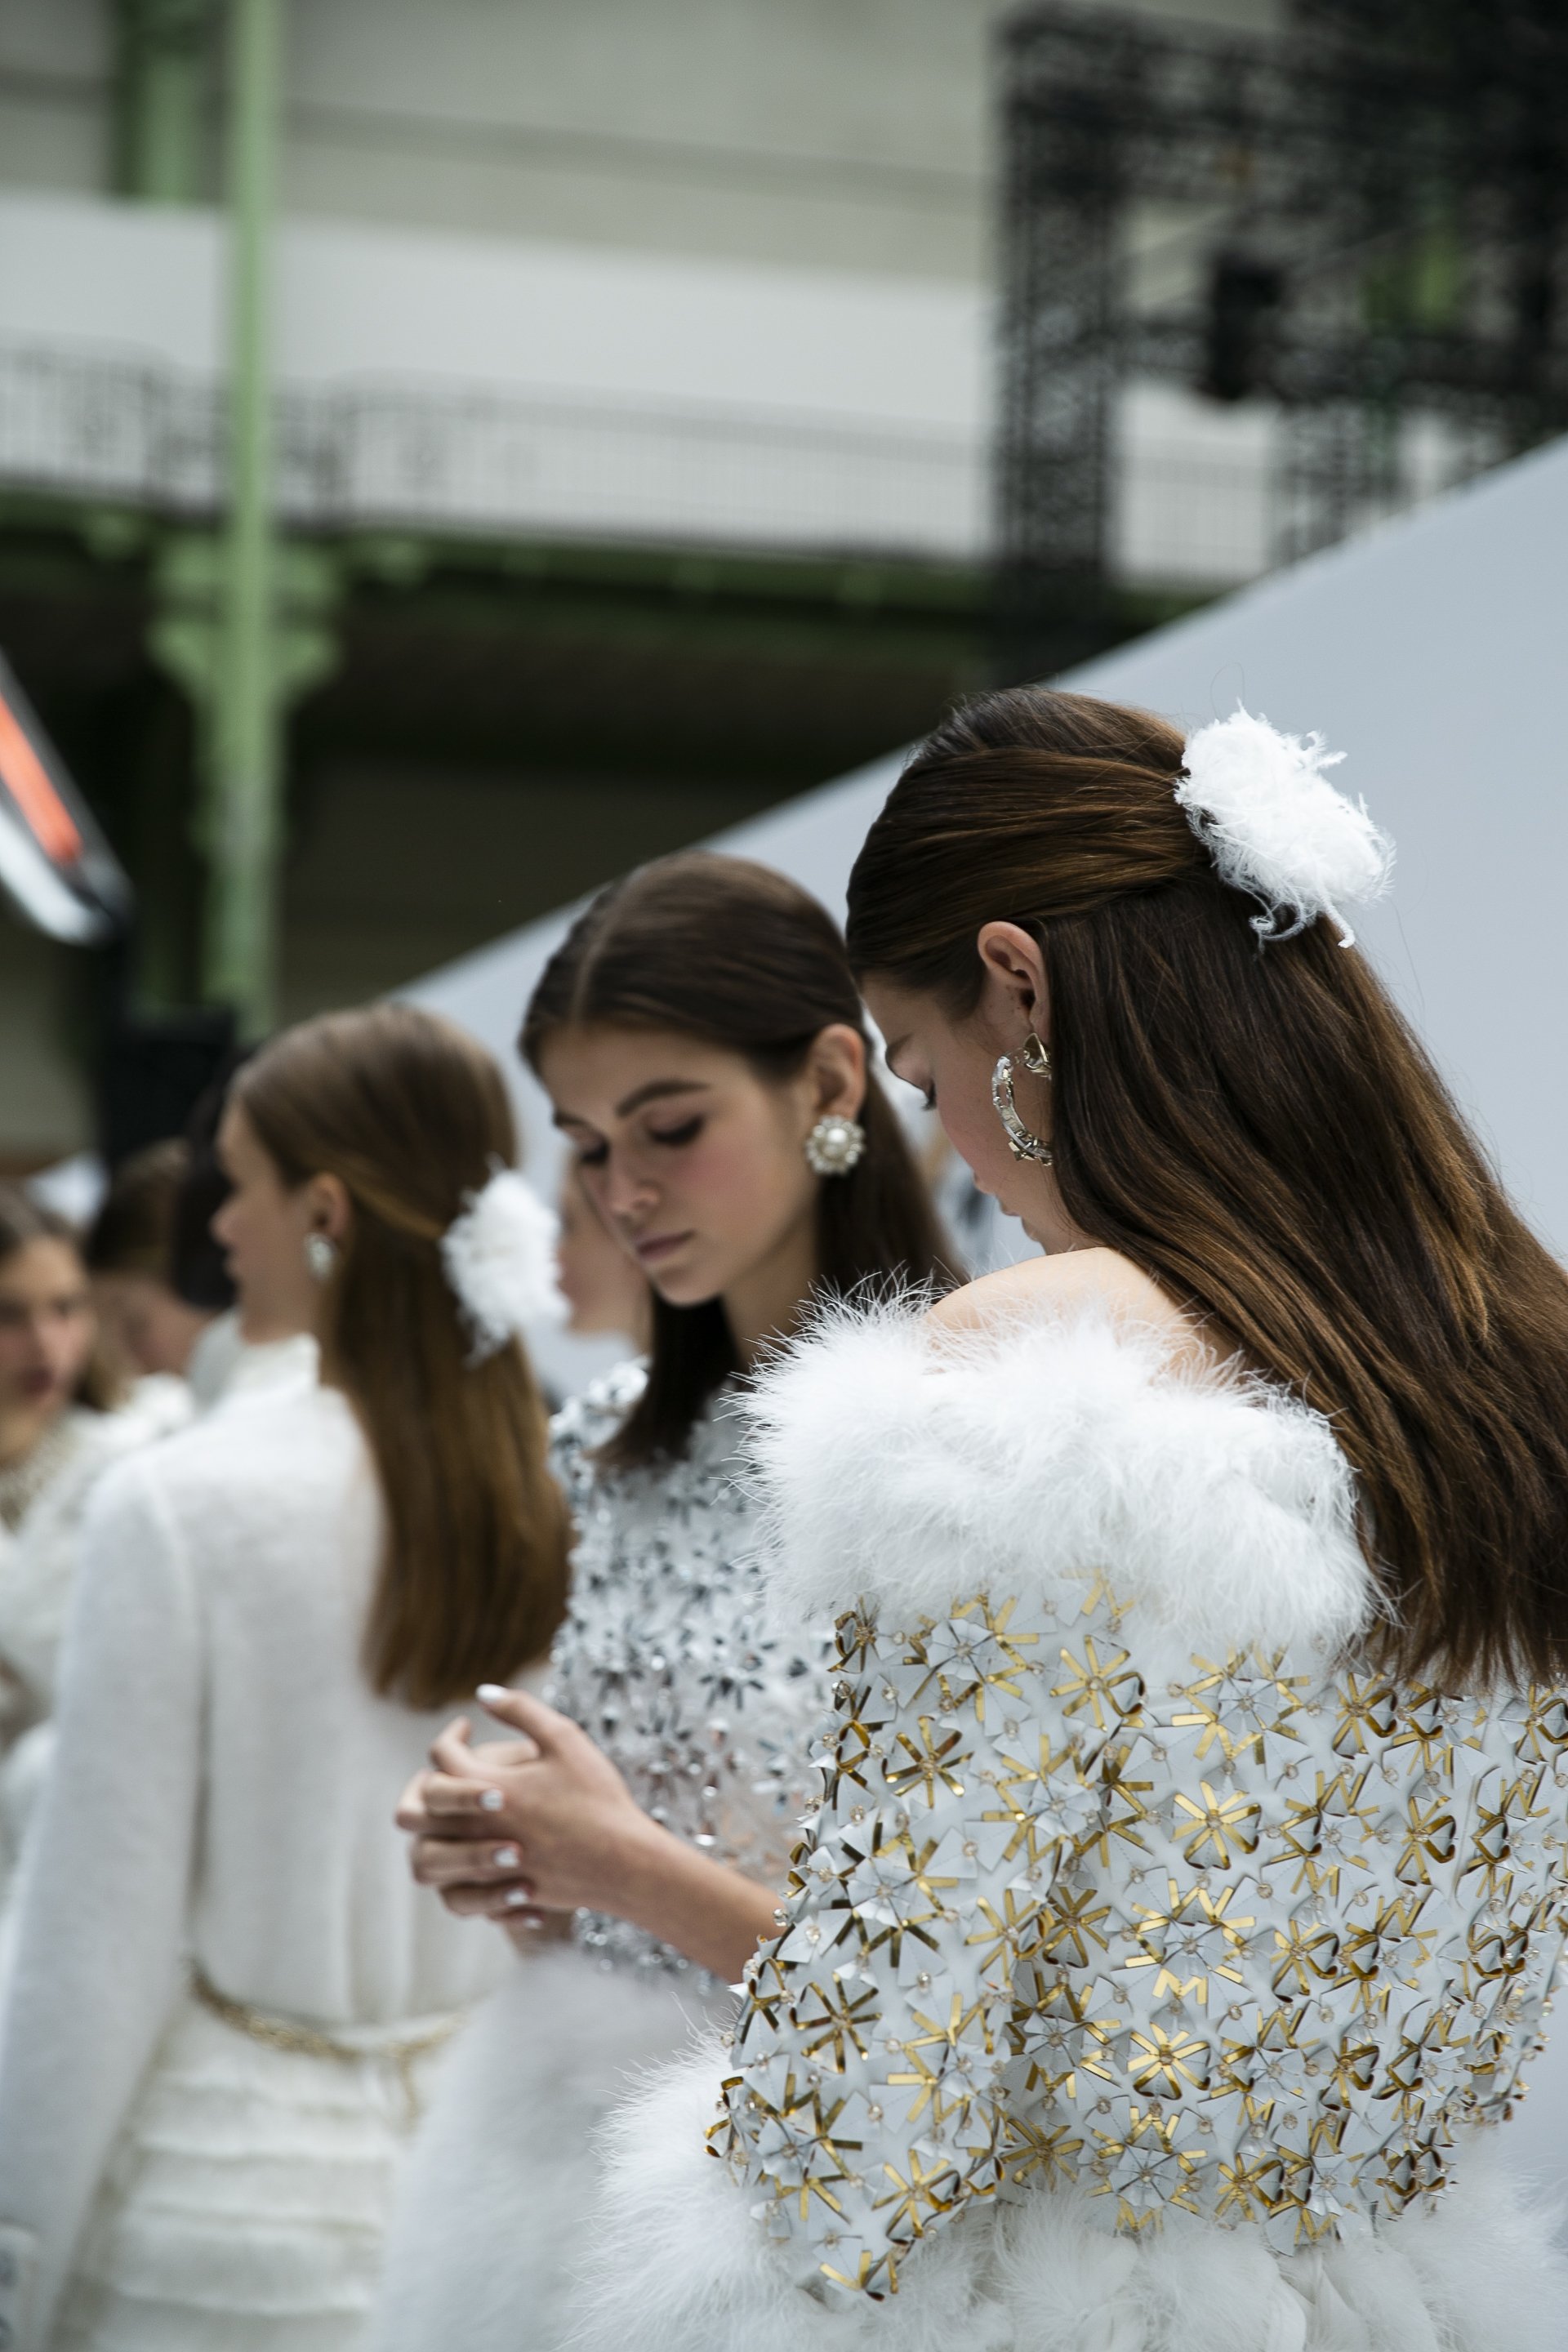 CHANEL on X: Hair accessories punctuate #CHANELFallWinter 2019/20